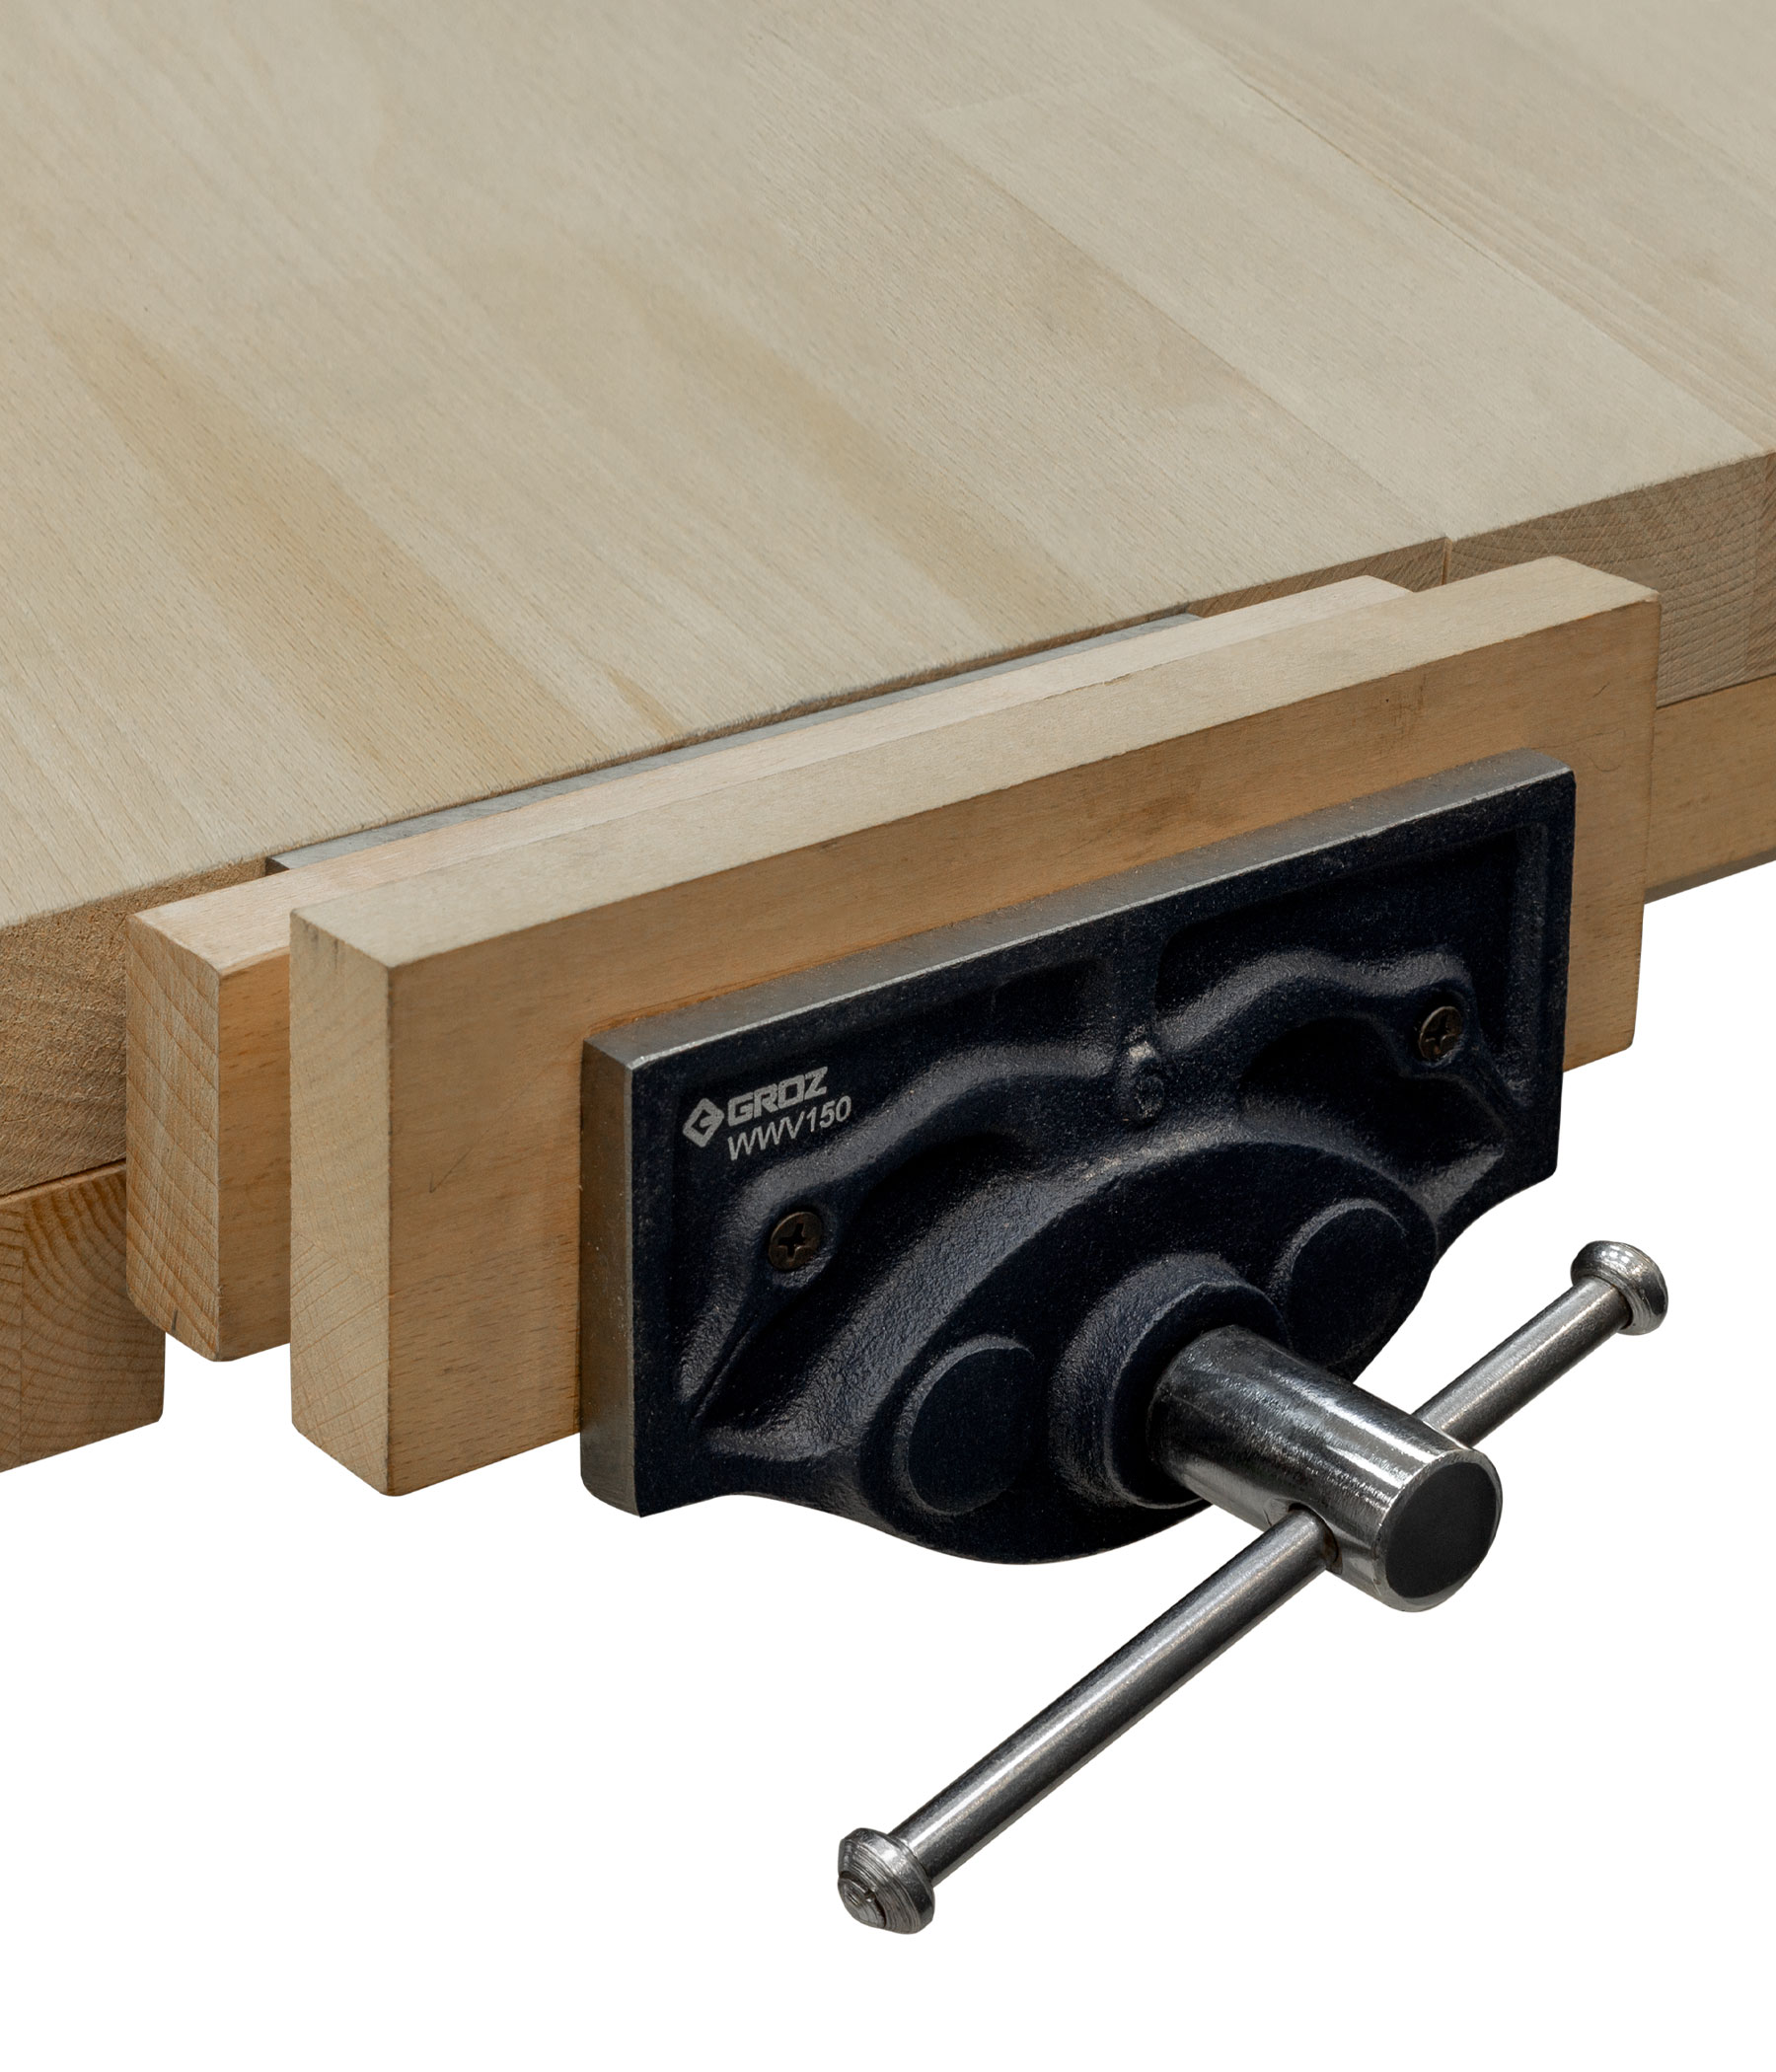 Joiner workbench VS 31 SV with side vice pack